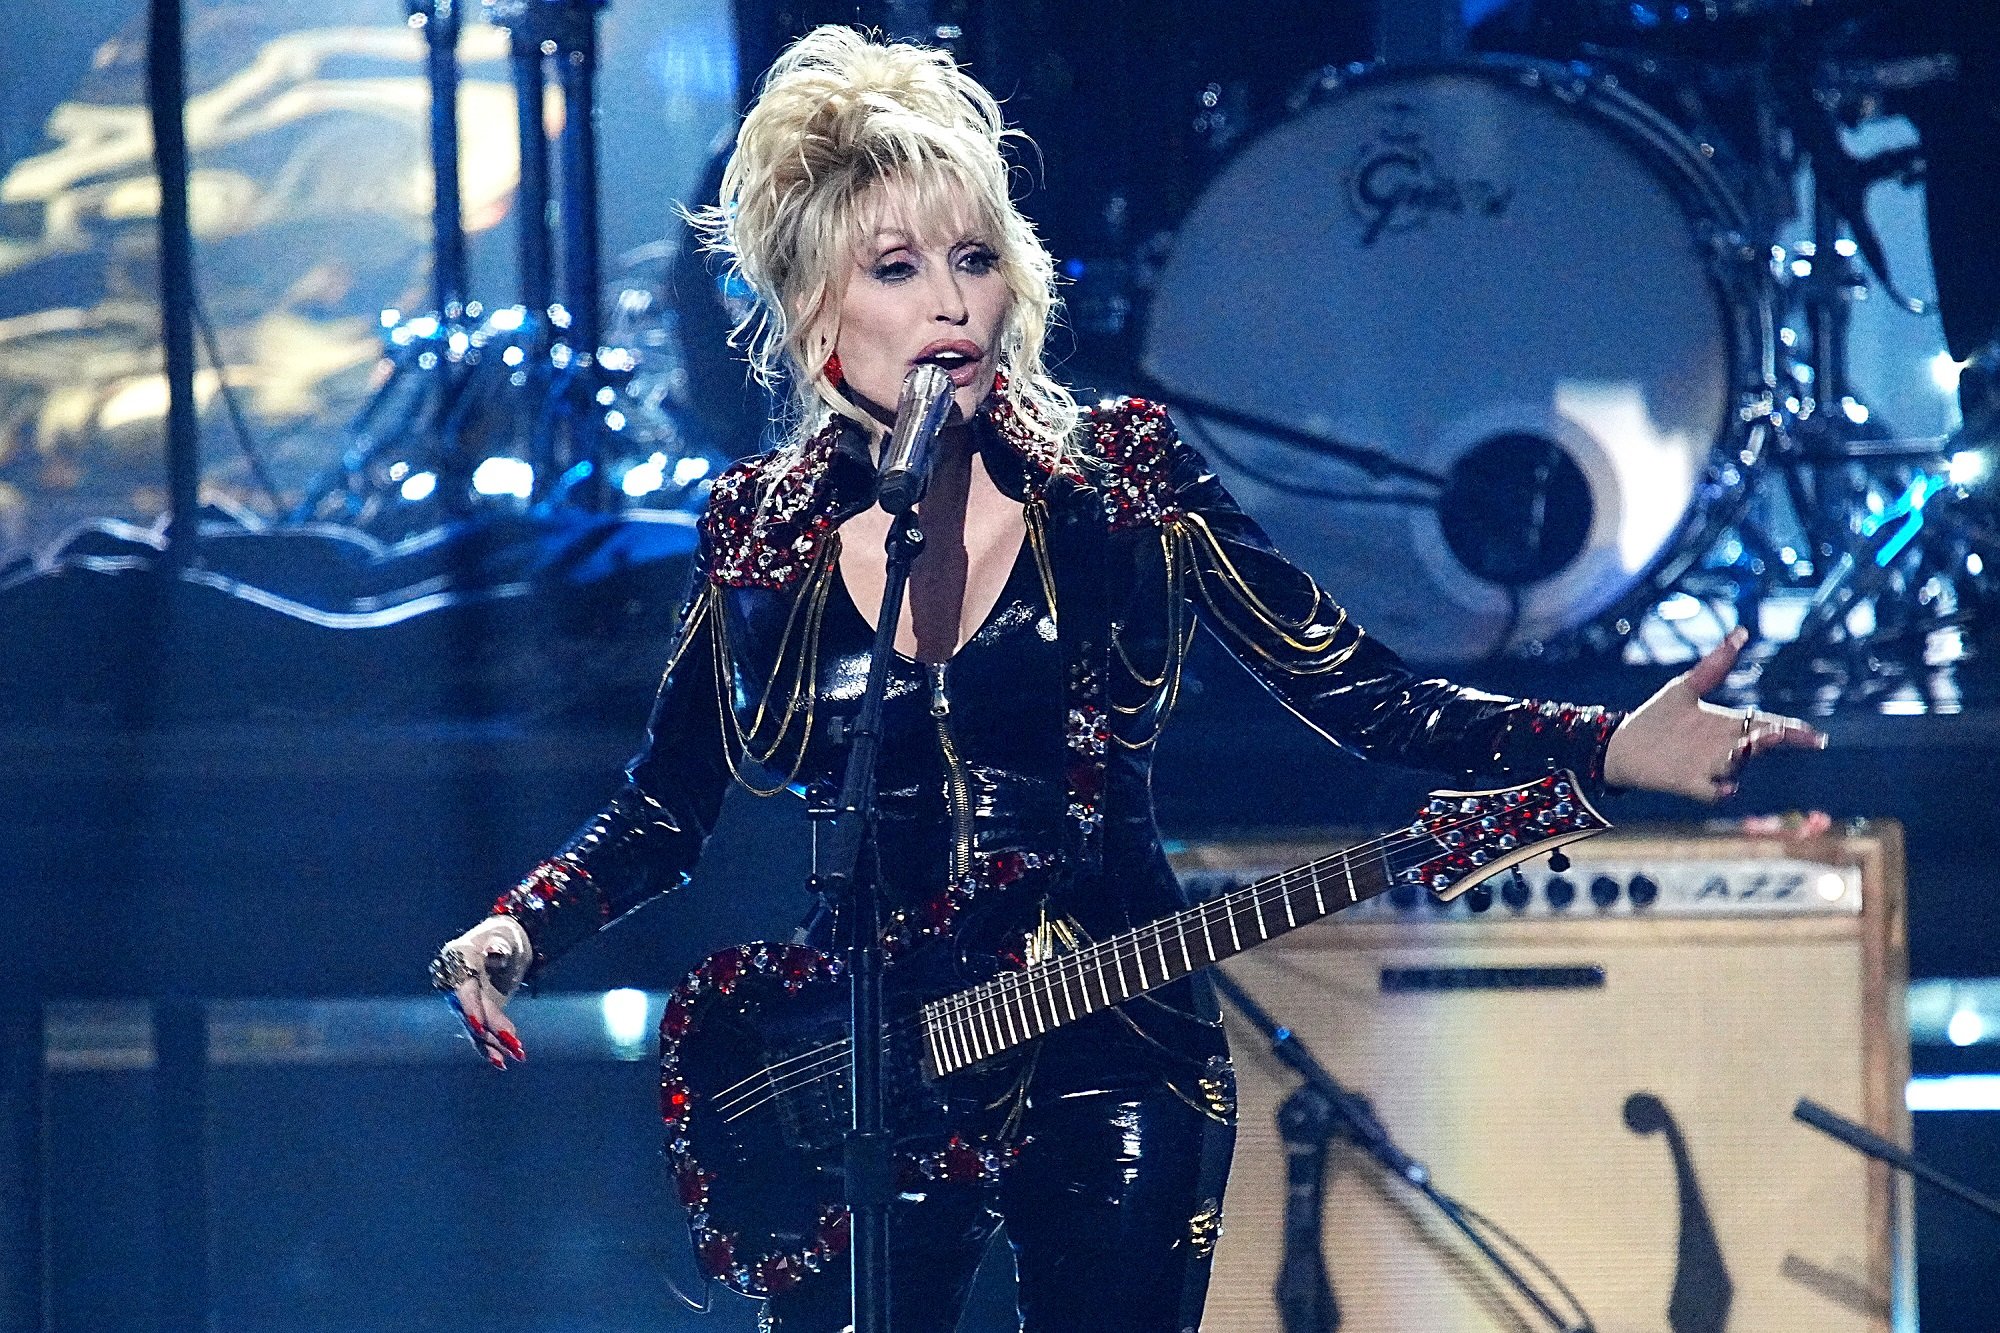 Dolly Parton performs on stage with an electric guitar while wearing a black leather jumpsuit